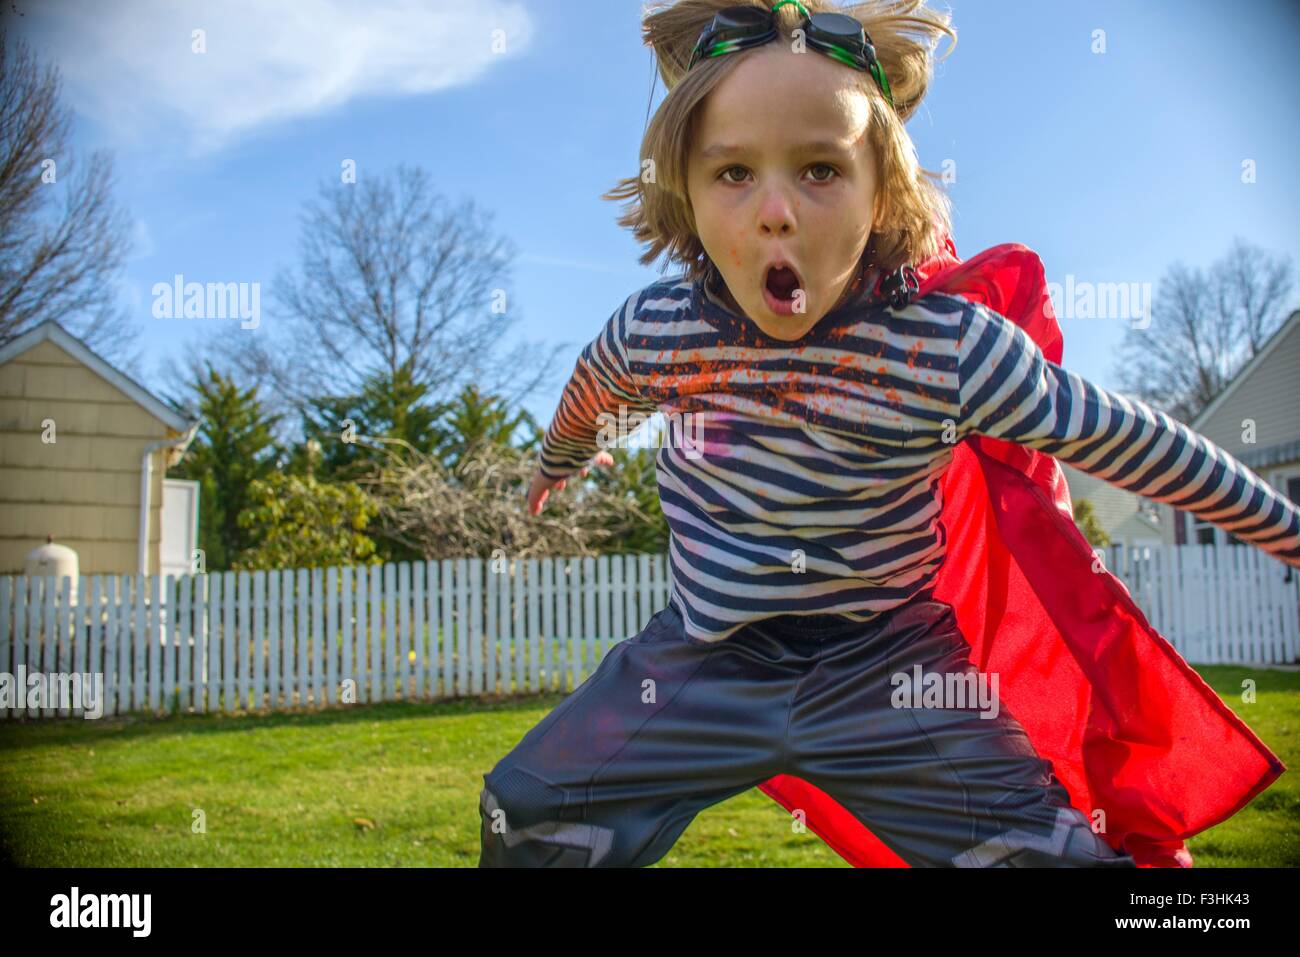 Boy with red cape pretending to fly Stock Photo